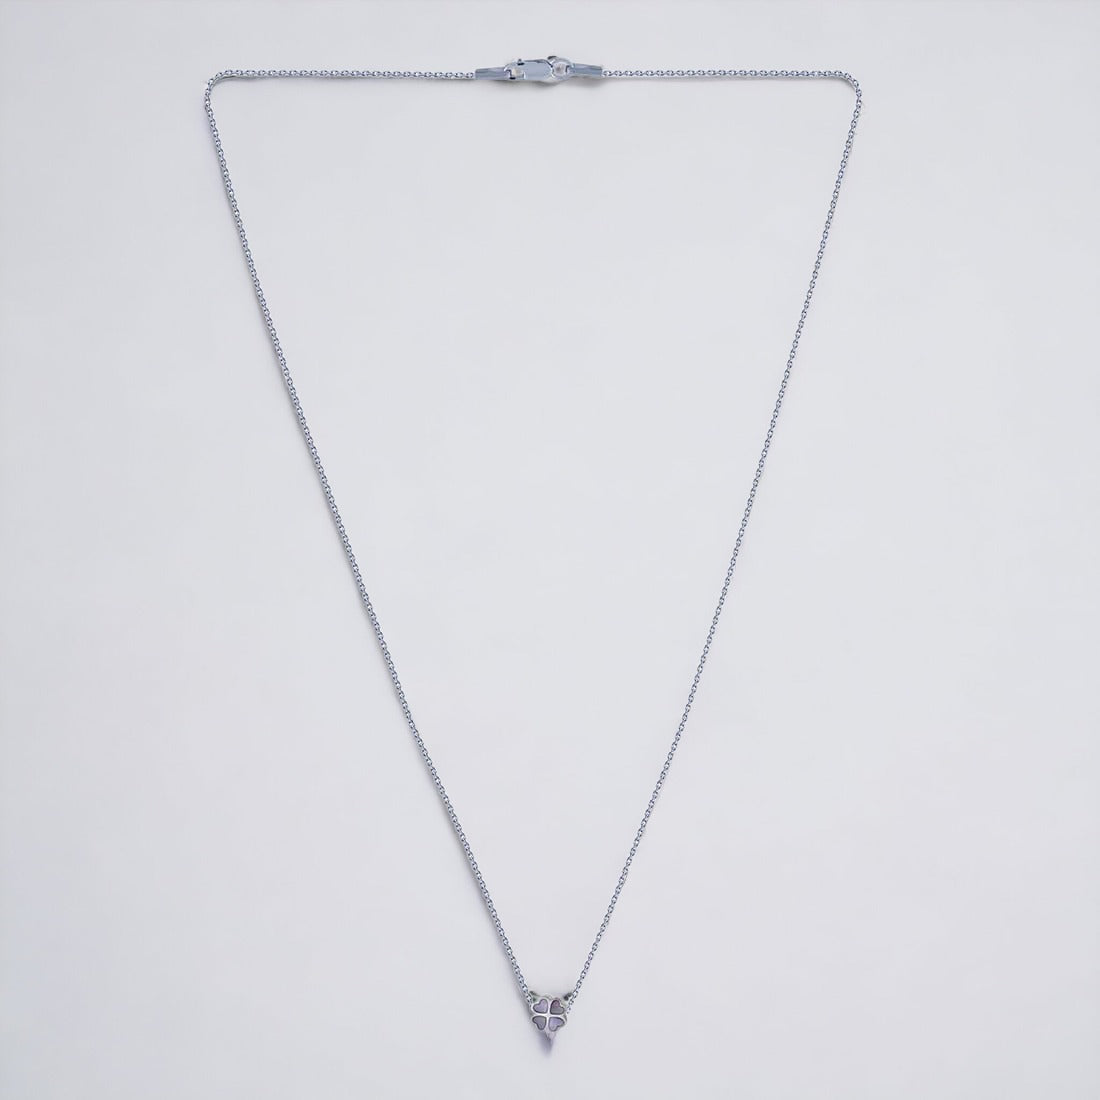 Grey Flower Pendant With Chain For Women & Girls